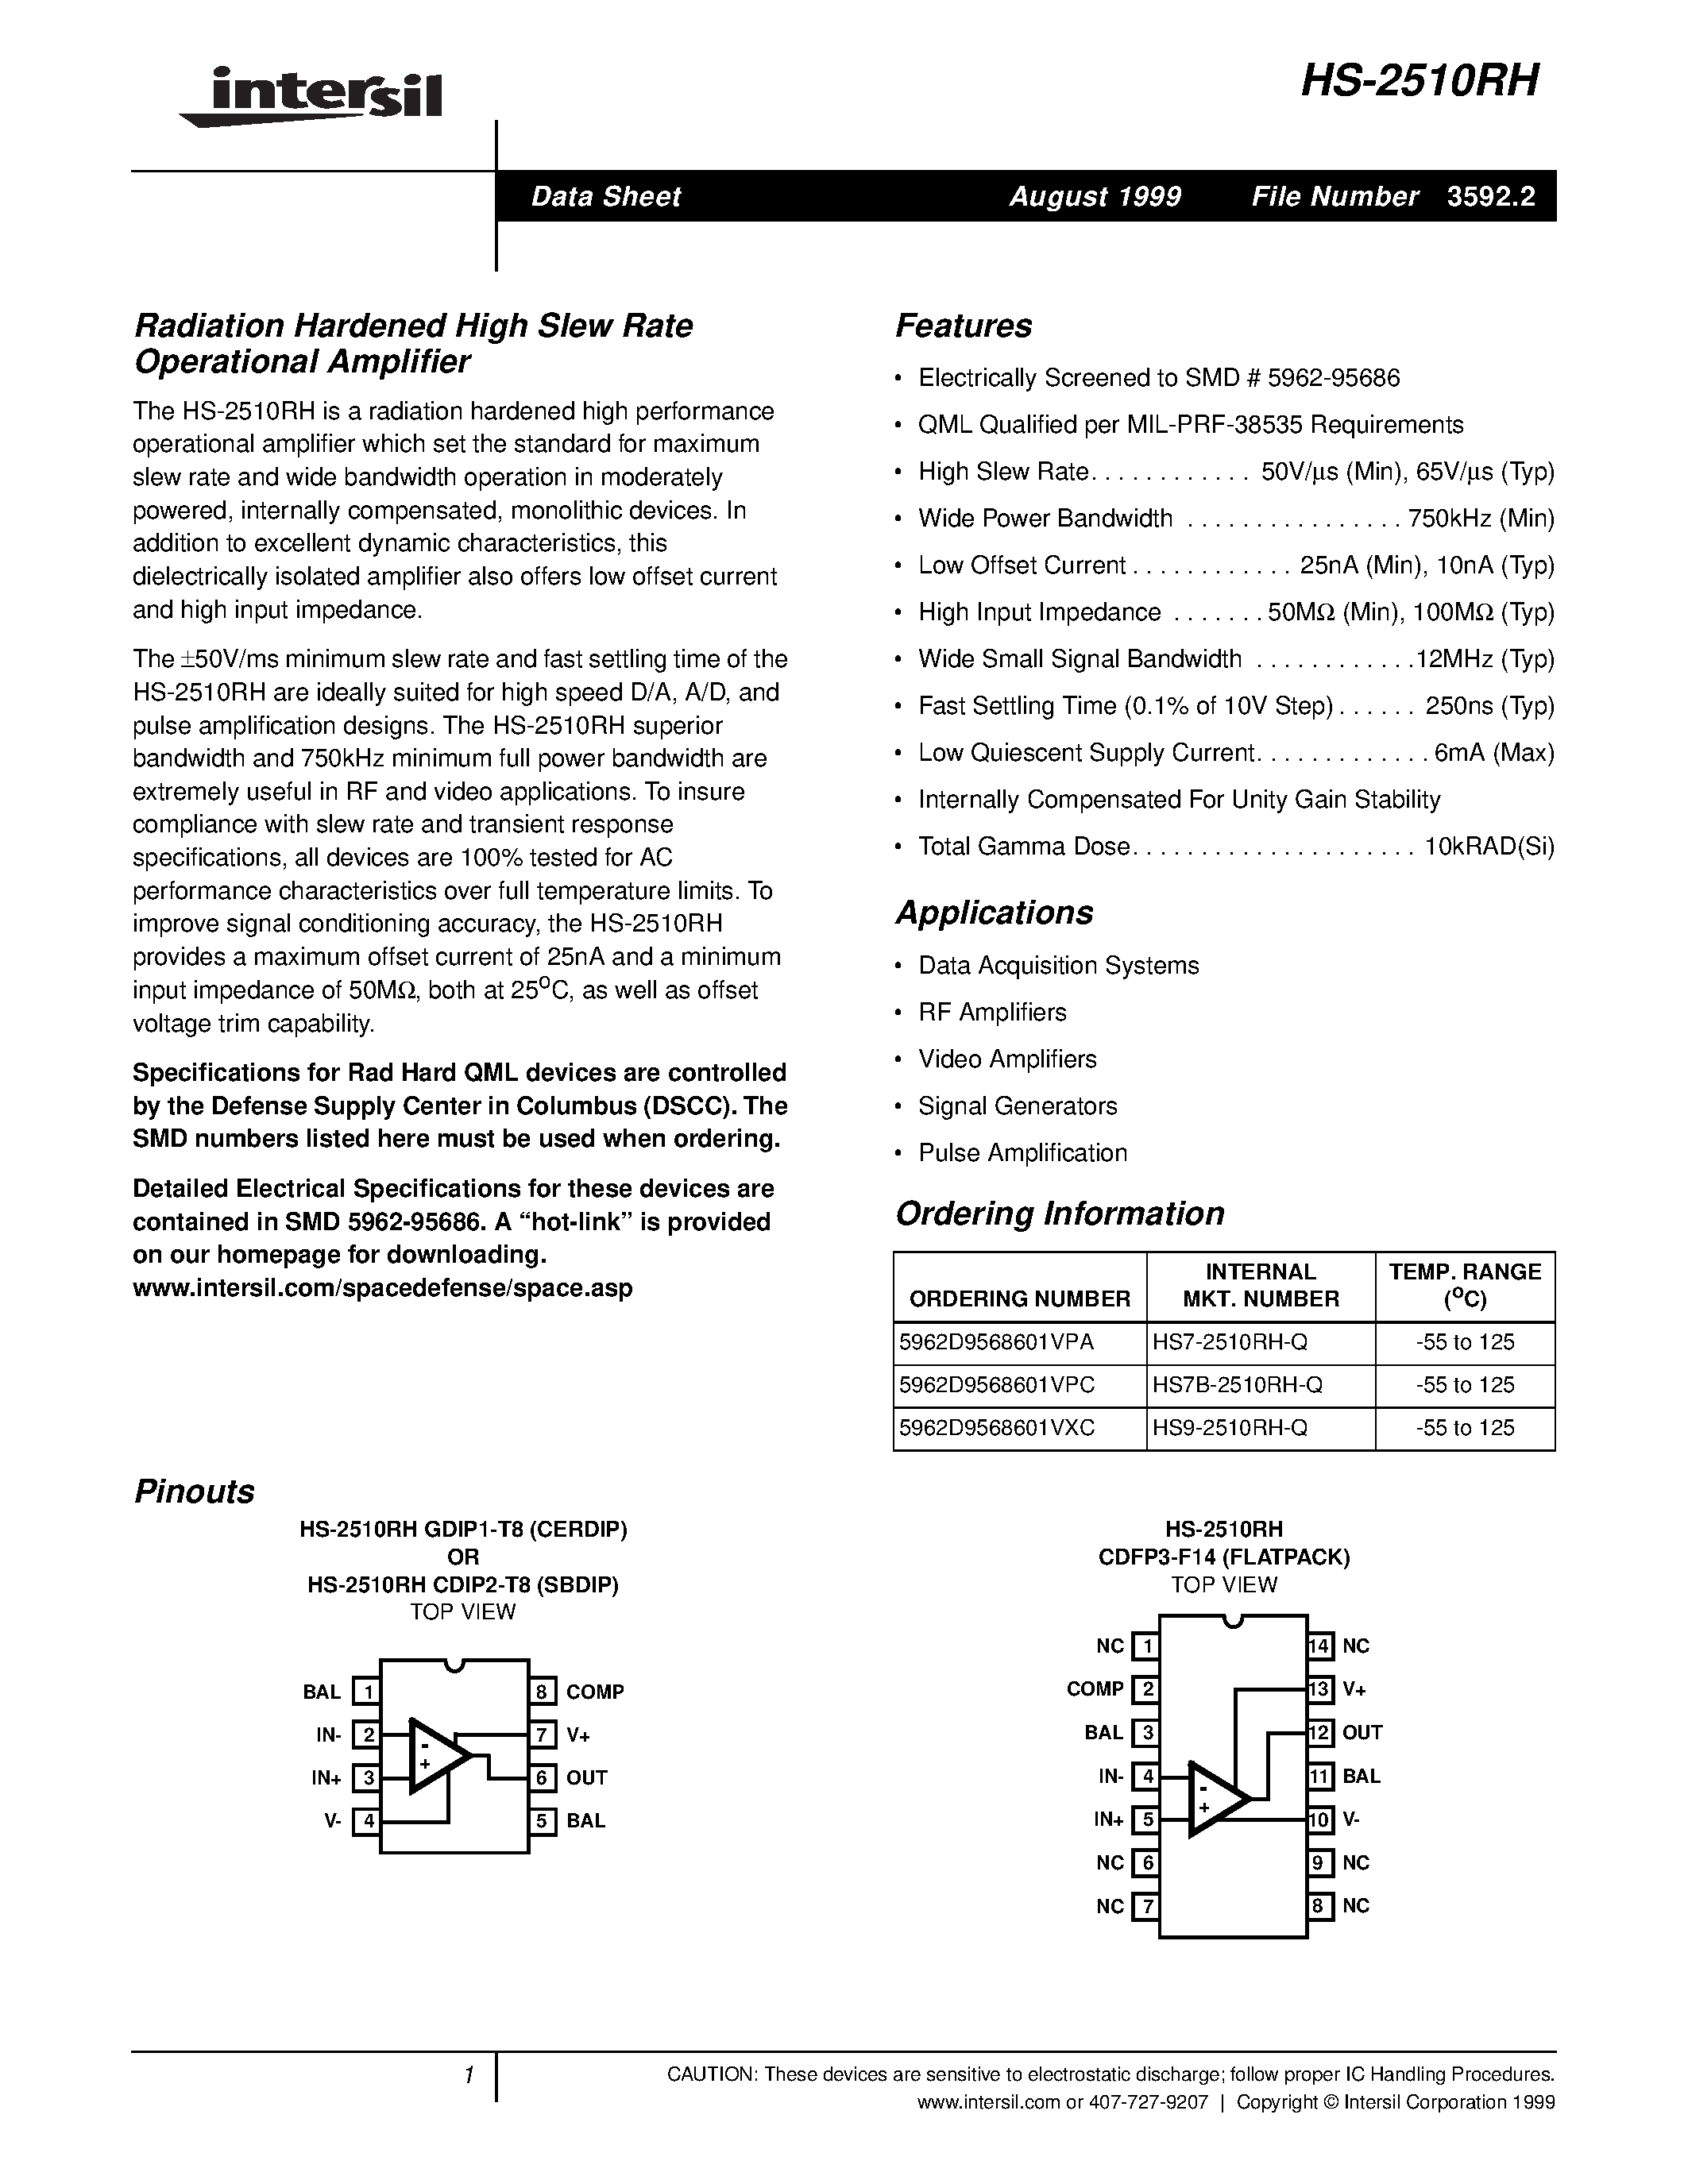 Datasheet HS7B-2510RH-Q - Radiation Hardened High Slew Rate Operational Amplifier page 1